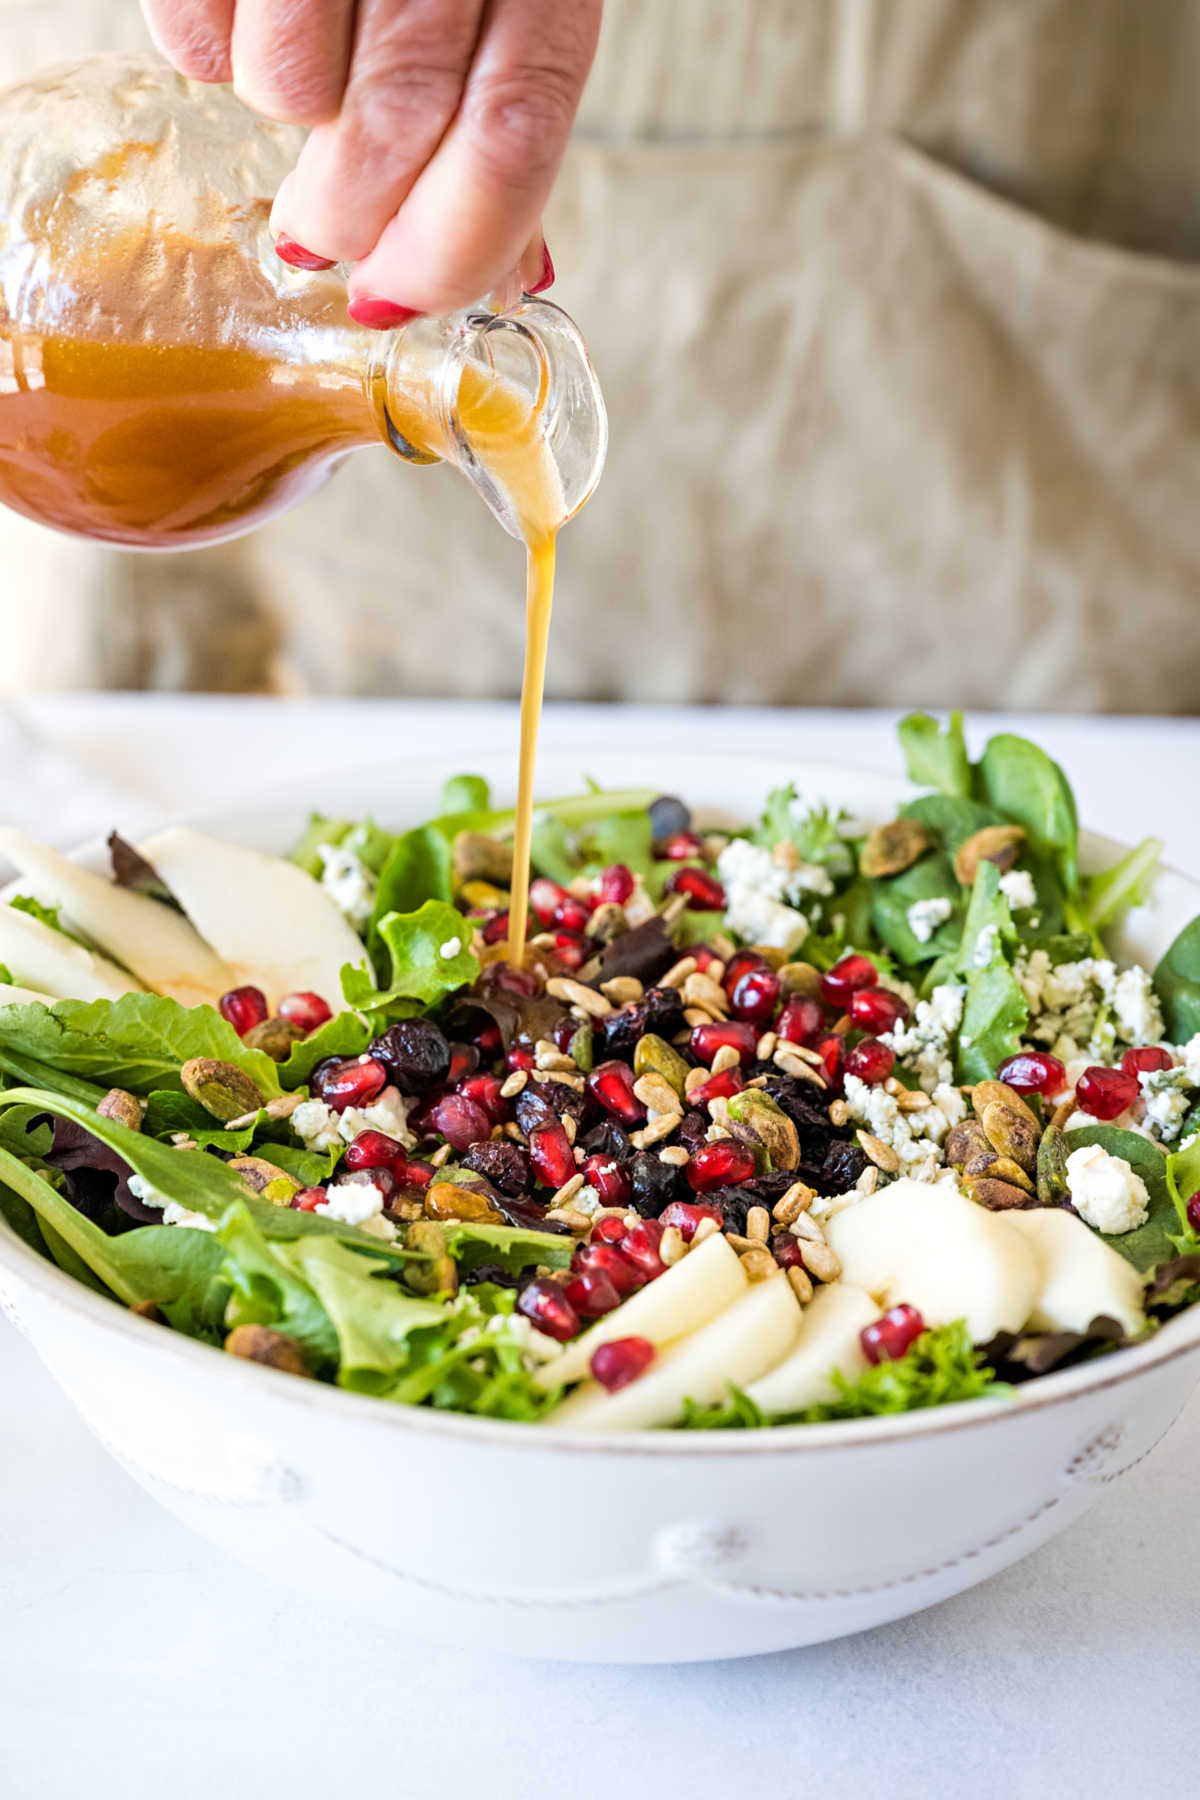 pouring cranberry maple vinaigrette over a bowl of salad greens with pears and pistachios.